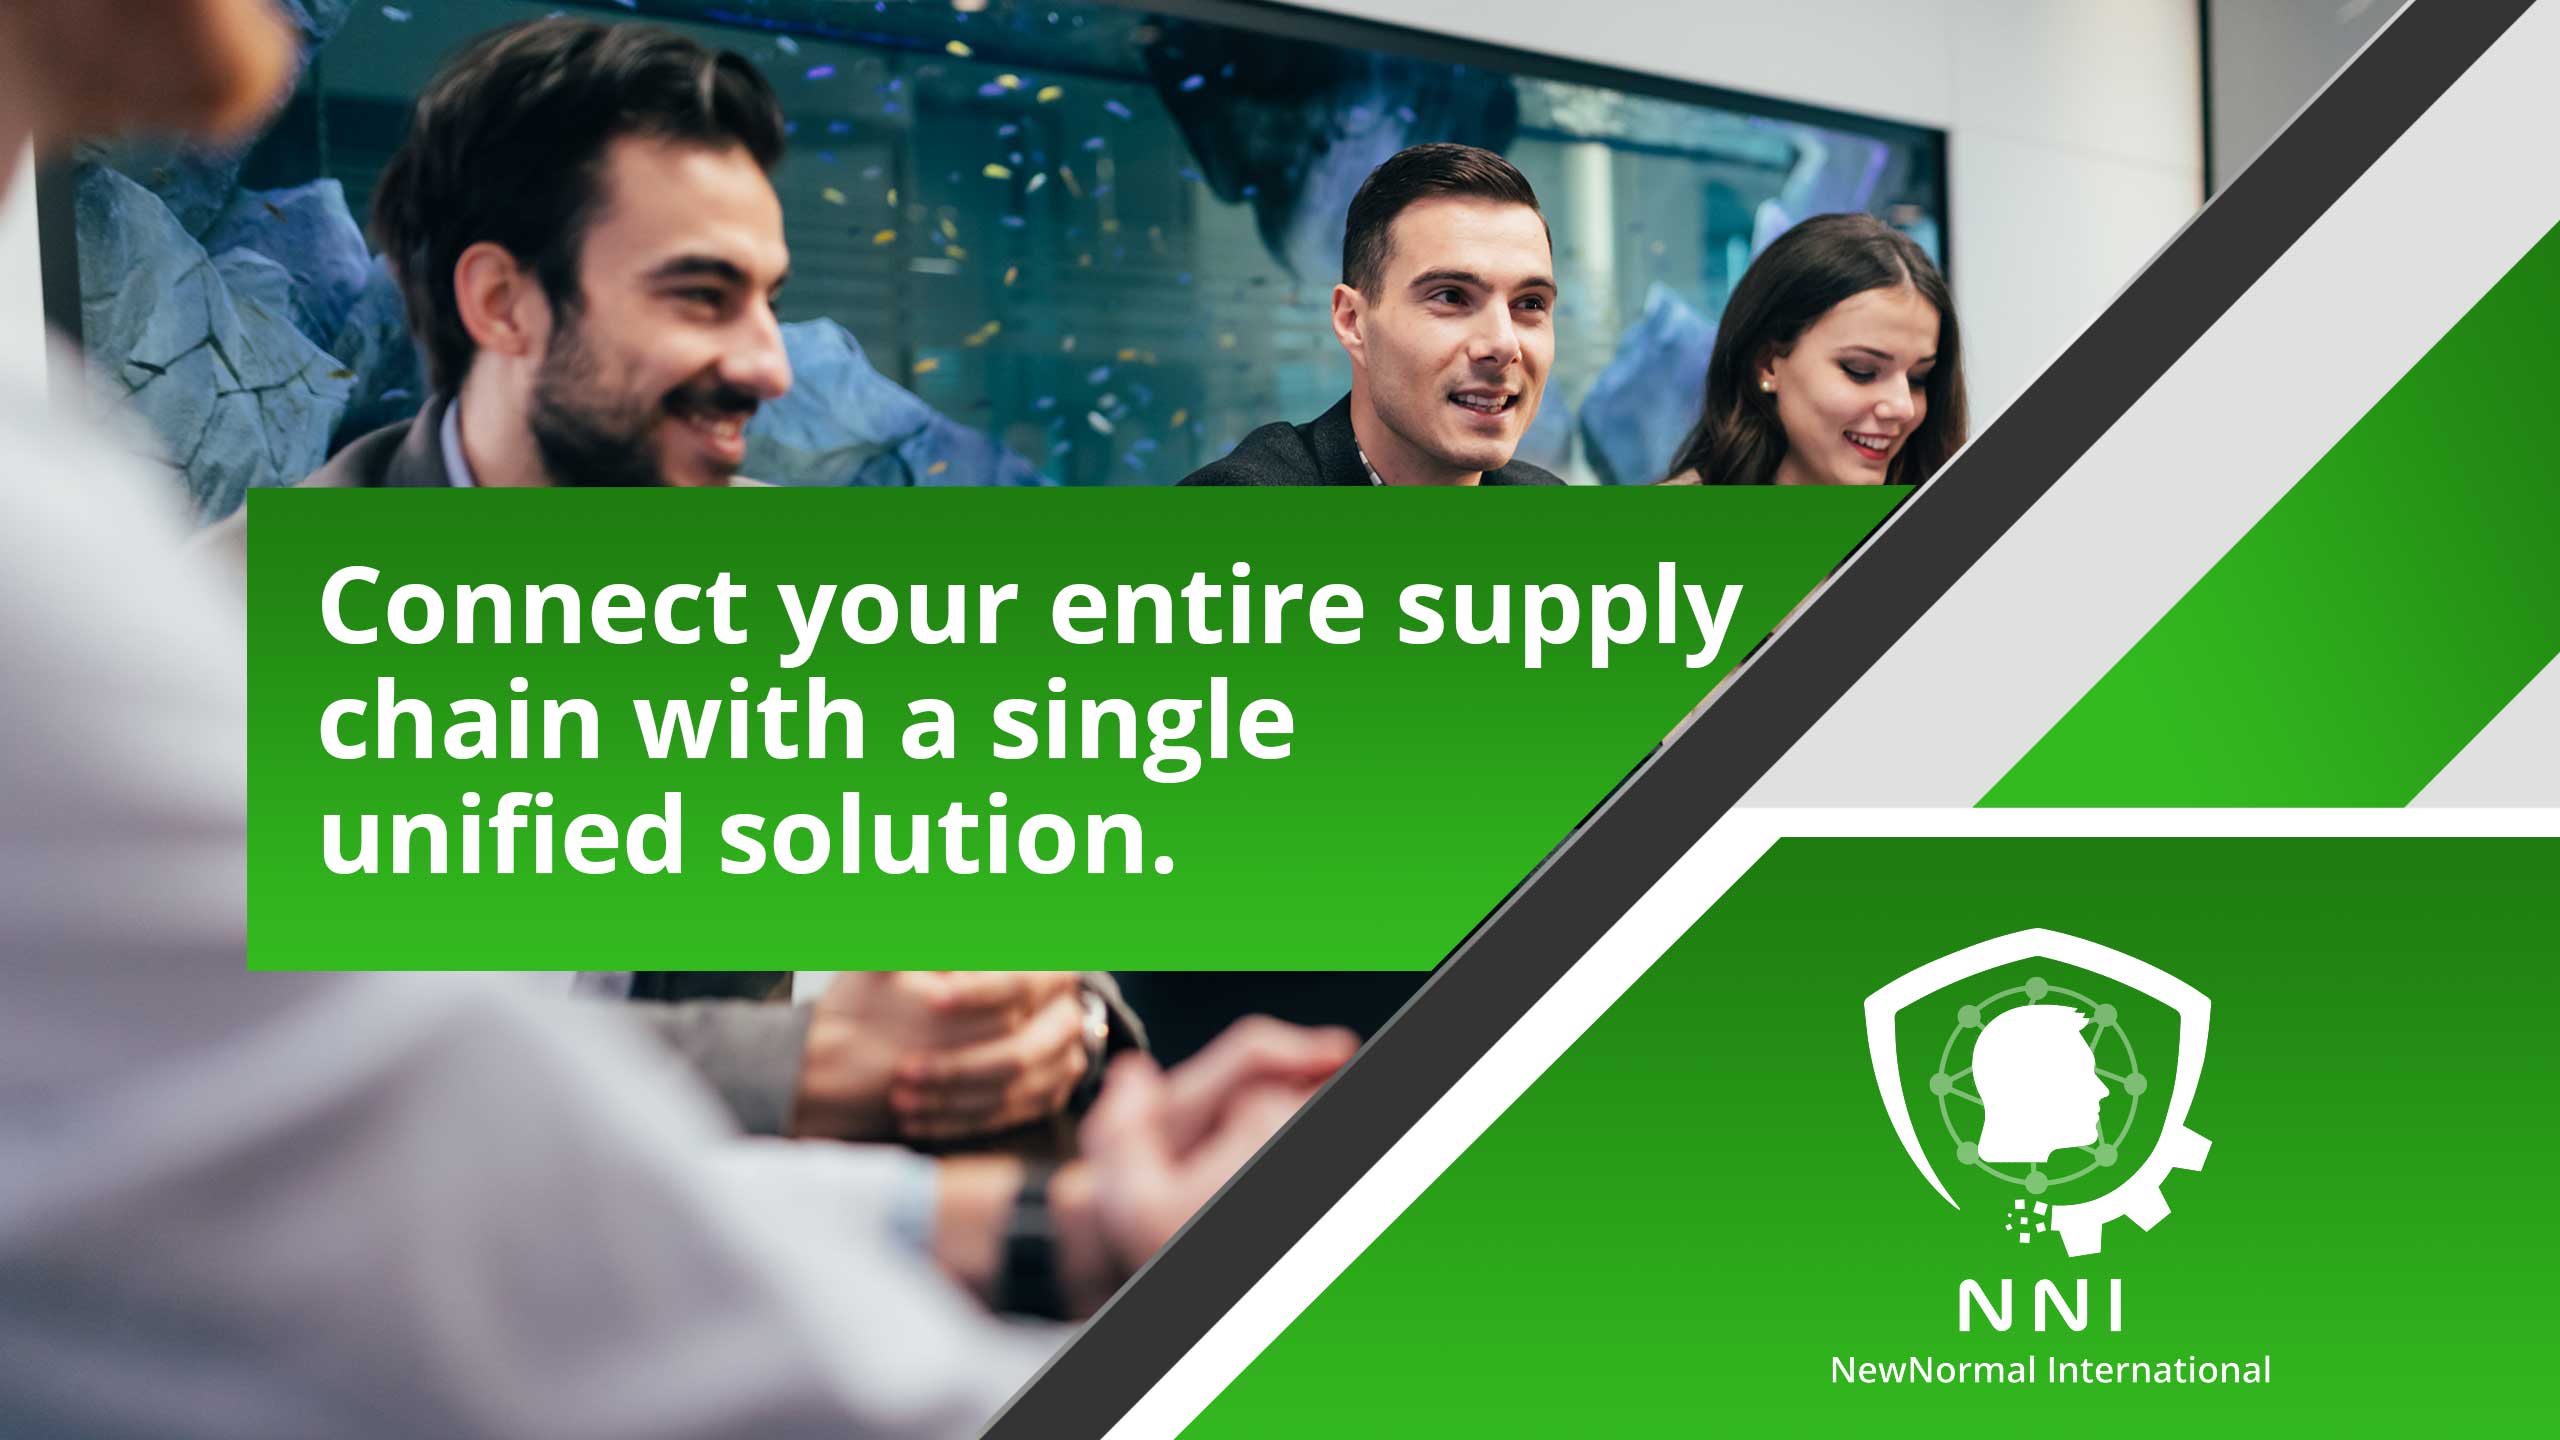 Unified Supply Chain Solution